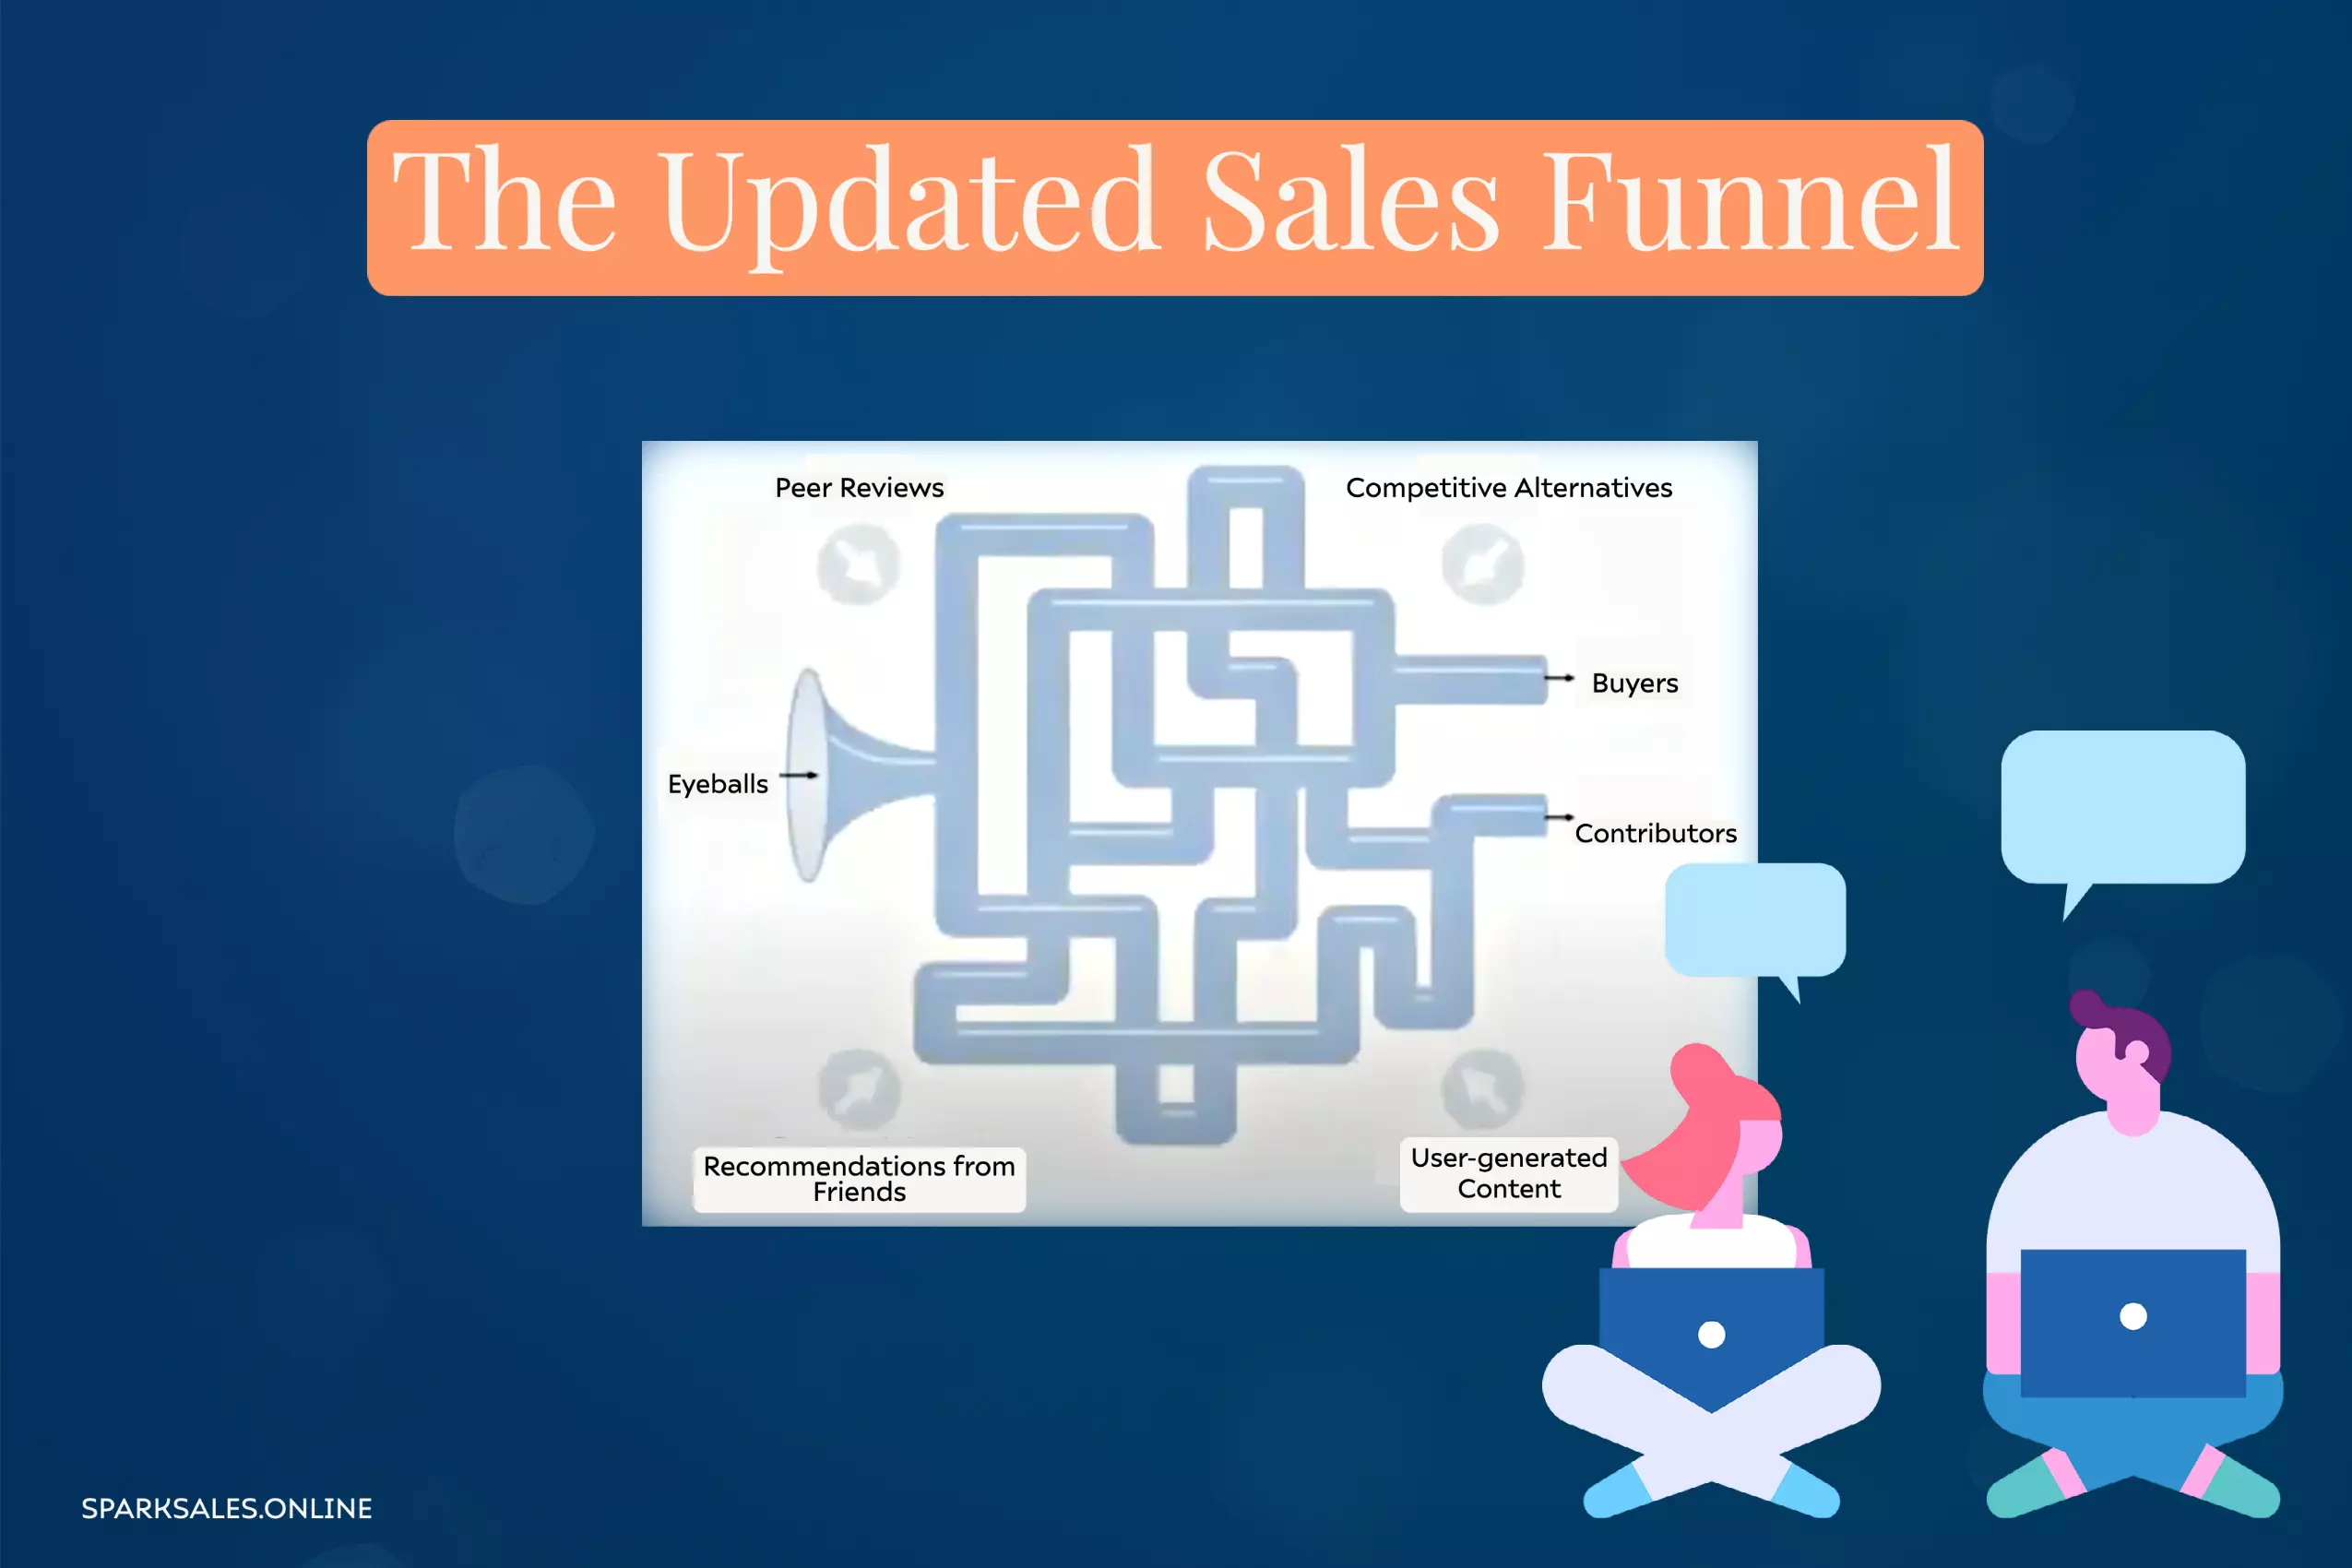 The Updated Sales Funnel